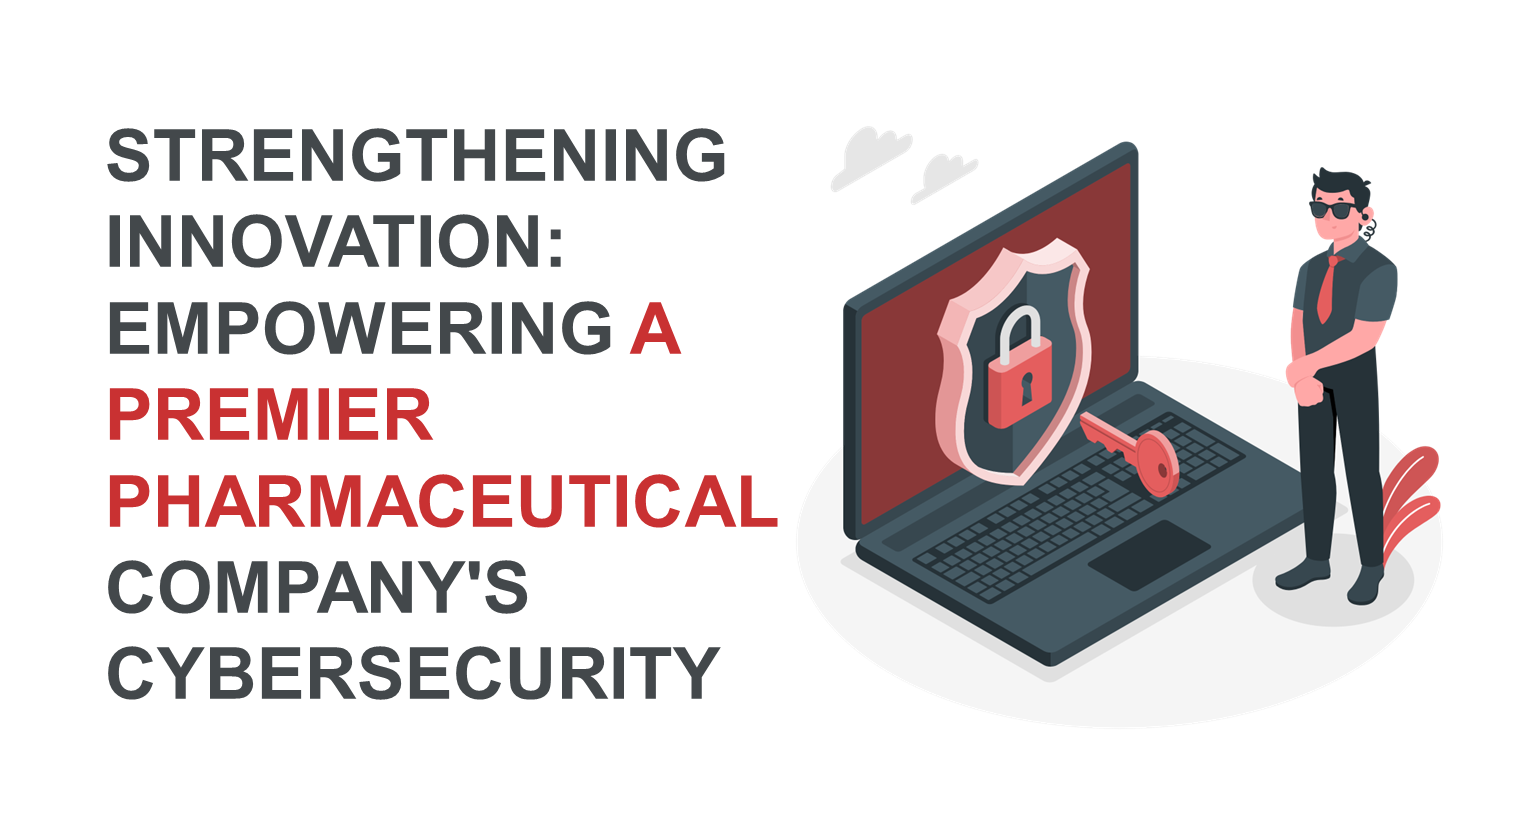 Strengthening Innovation: Empowering a Premier Pharmaceutical Company's Cybersecurity 